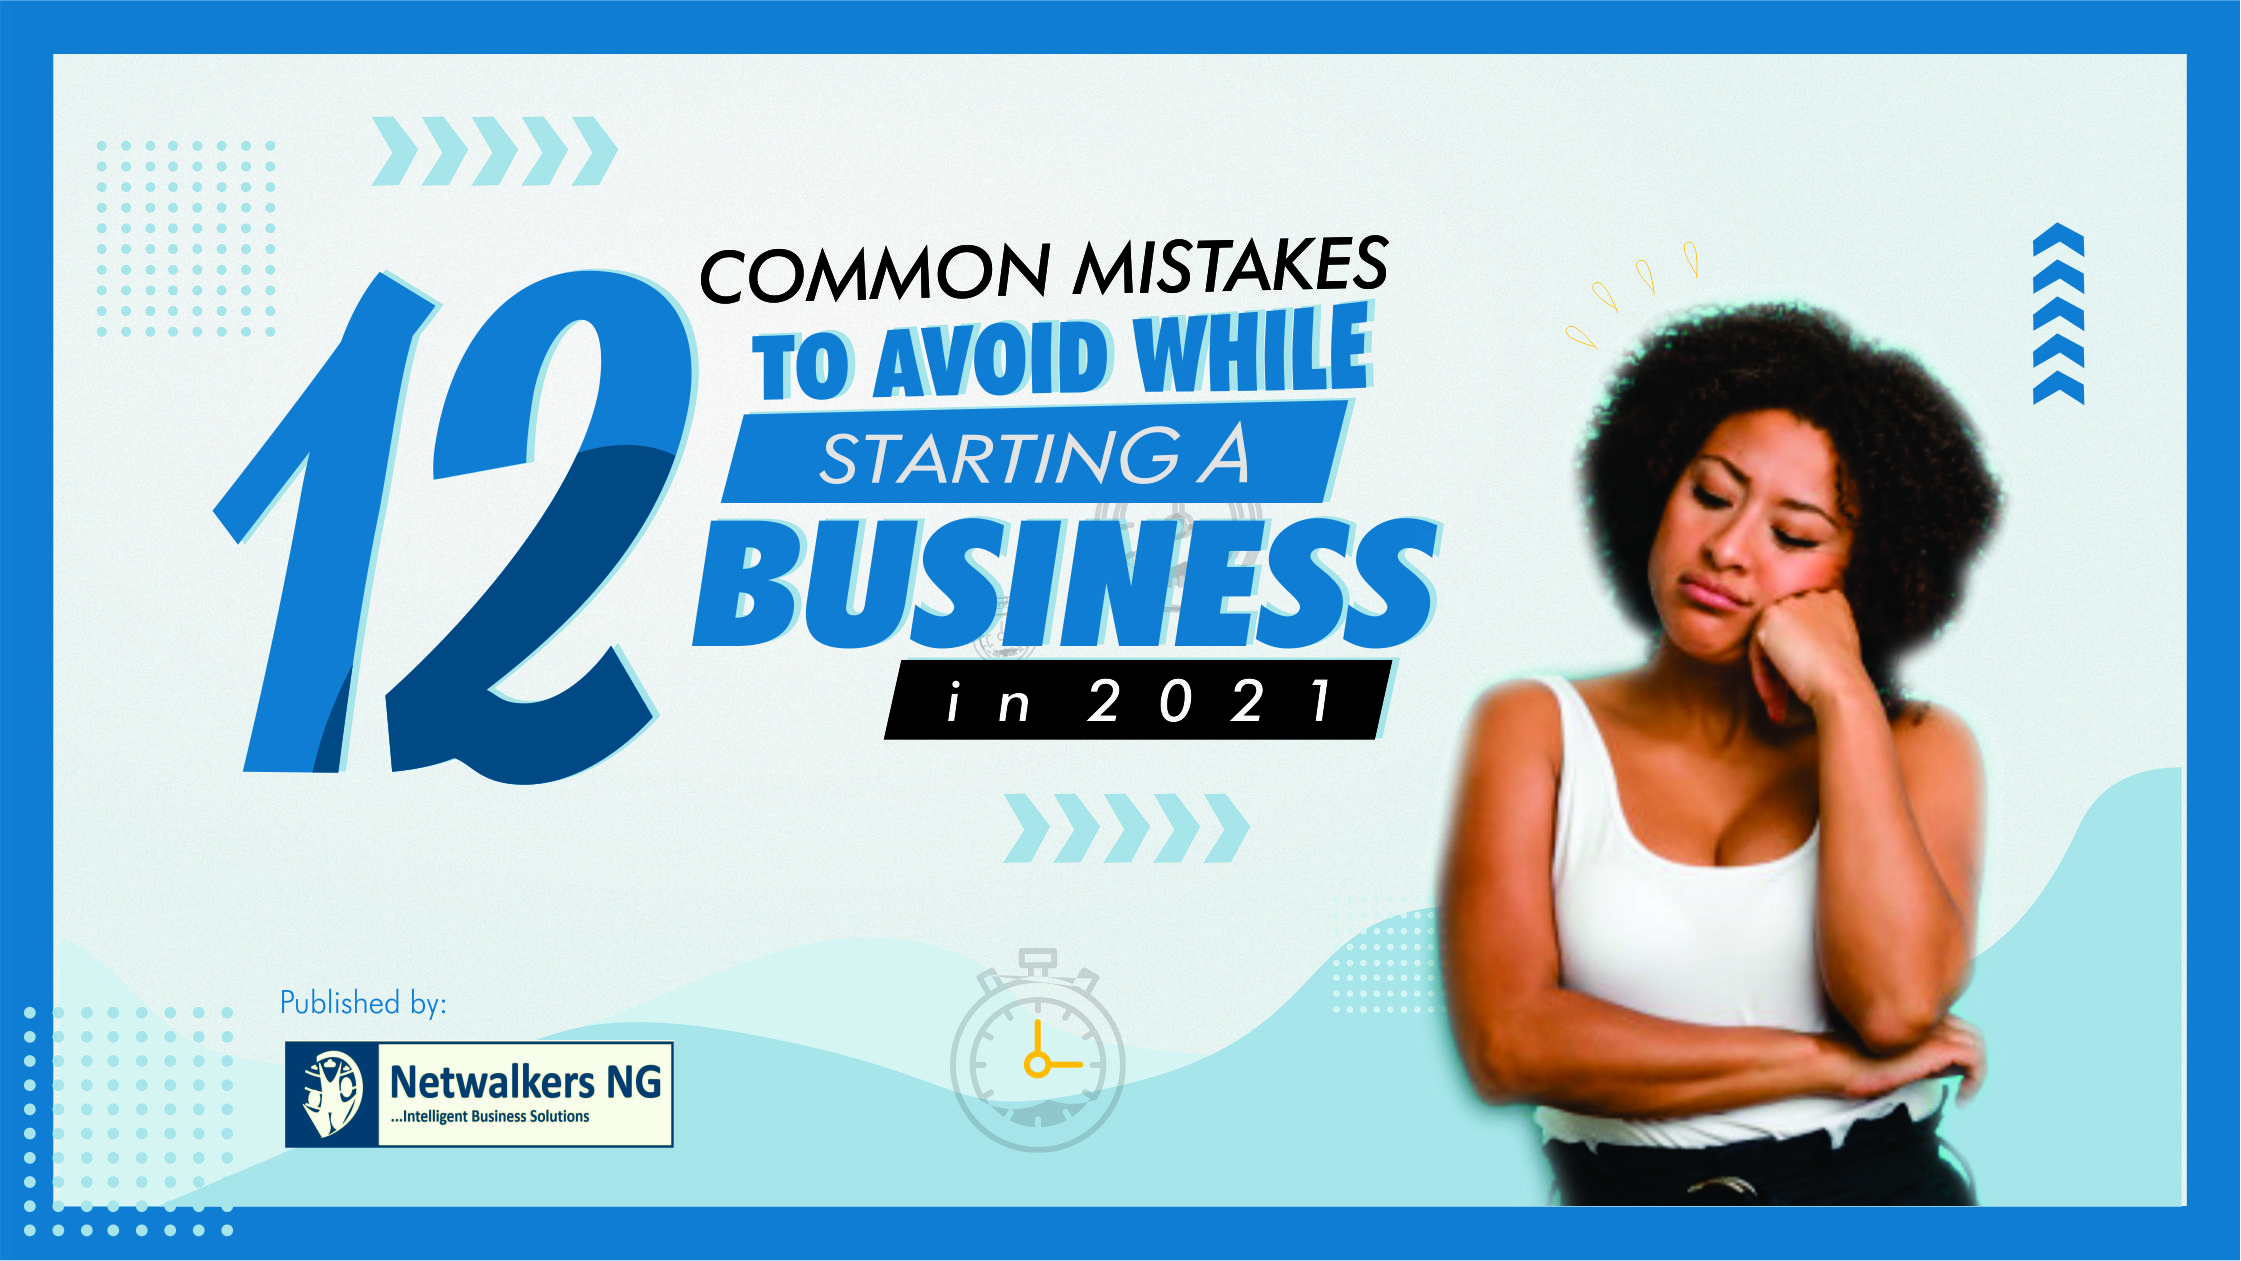 12 Common Mistakes to Avoid While Starting a Business in 2021